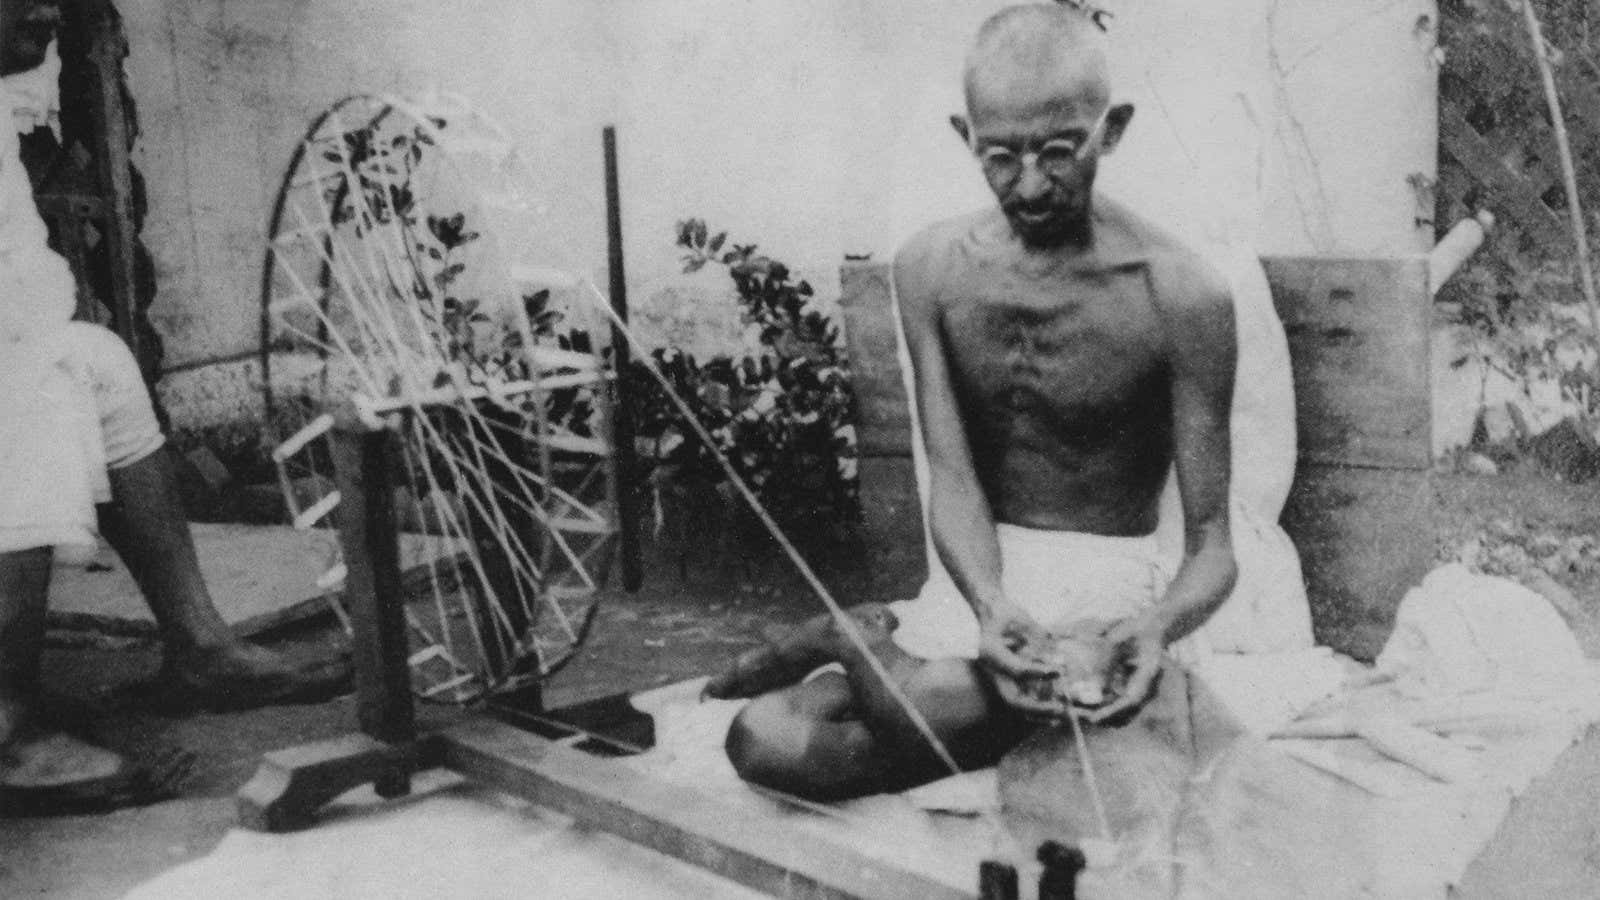 There’s still a lot to learn from Gandhi.